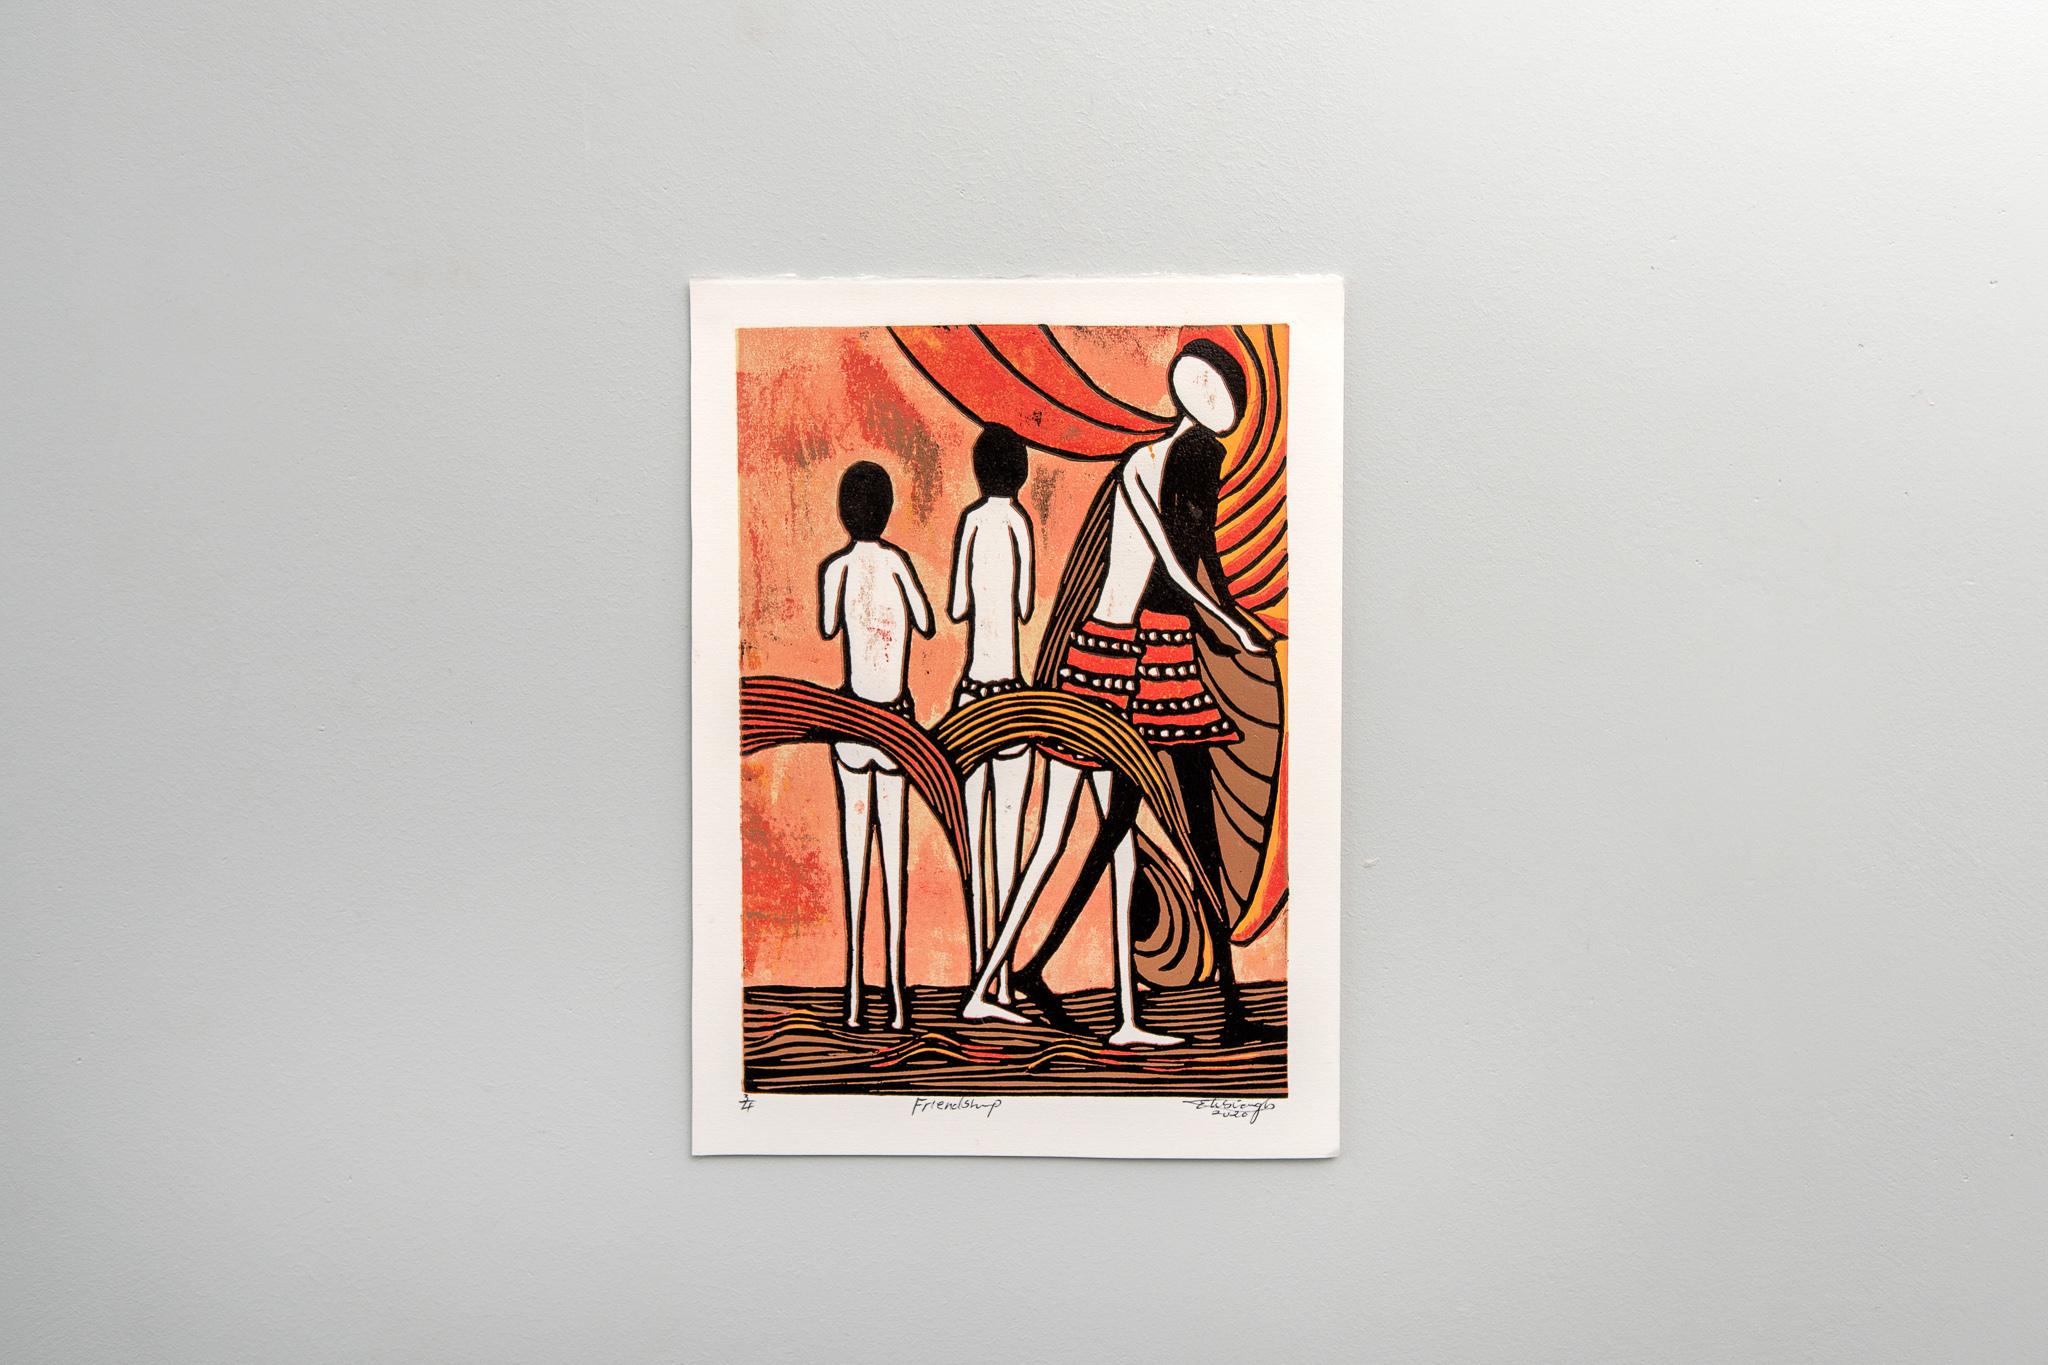 Friendship, 2020. Cardboard block print on fabriano paper, 3/4

Elisia Nghidishange was born in Eenhana in northern Namibia. This printmaker, sculptor and mixed media artist graduated from the College of the Arts in Windhoek in 2016. Nghidishange